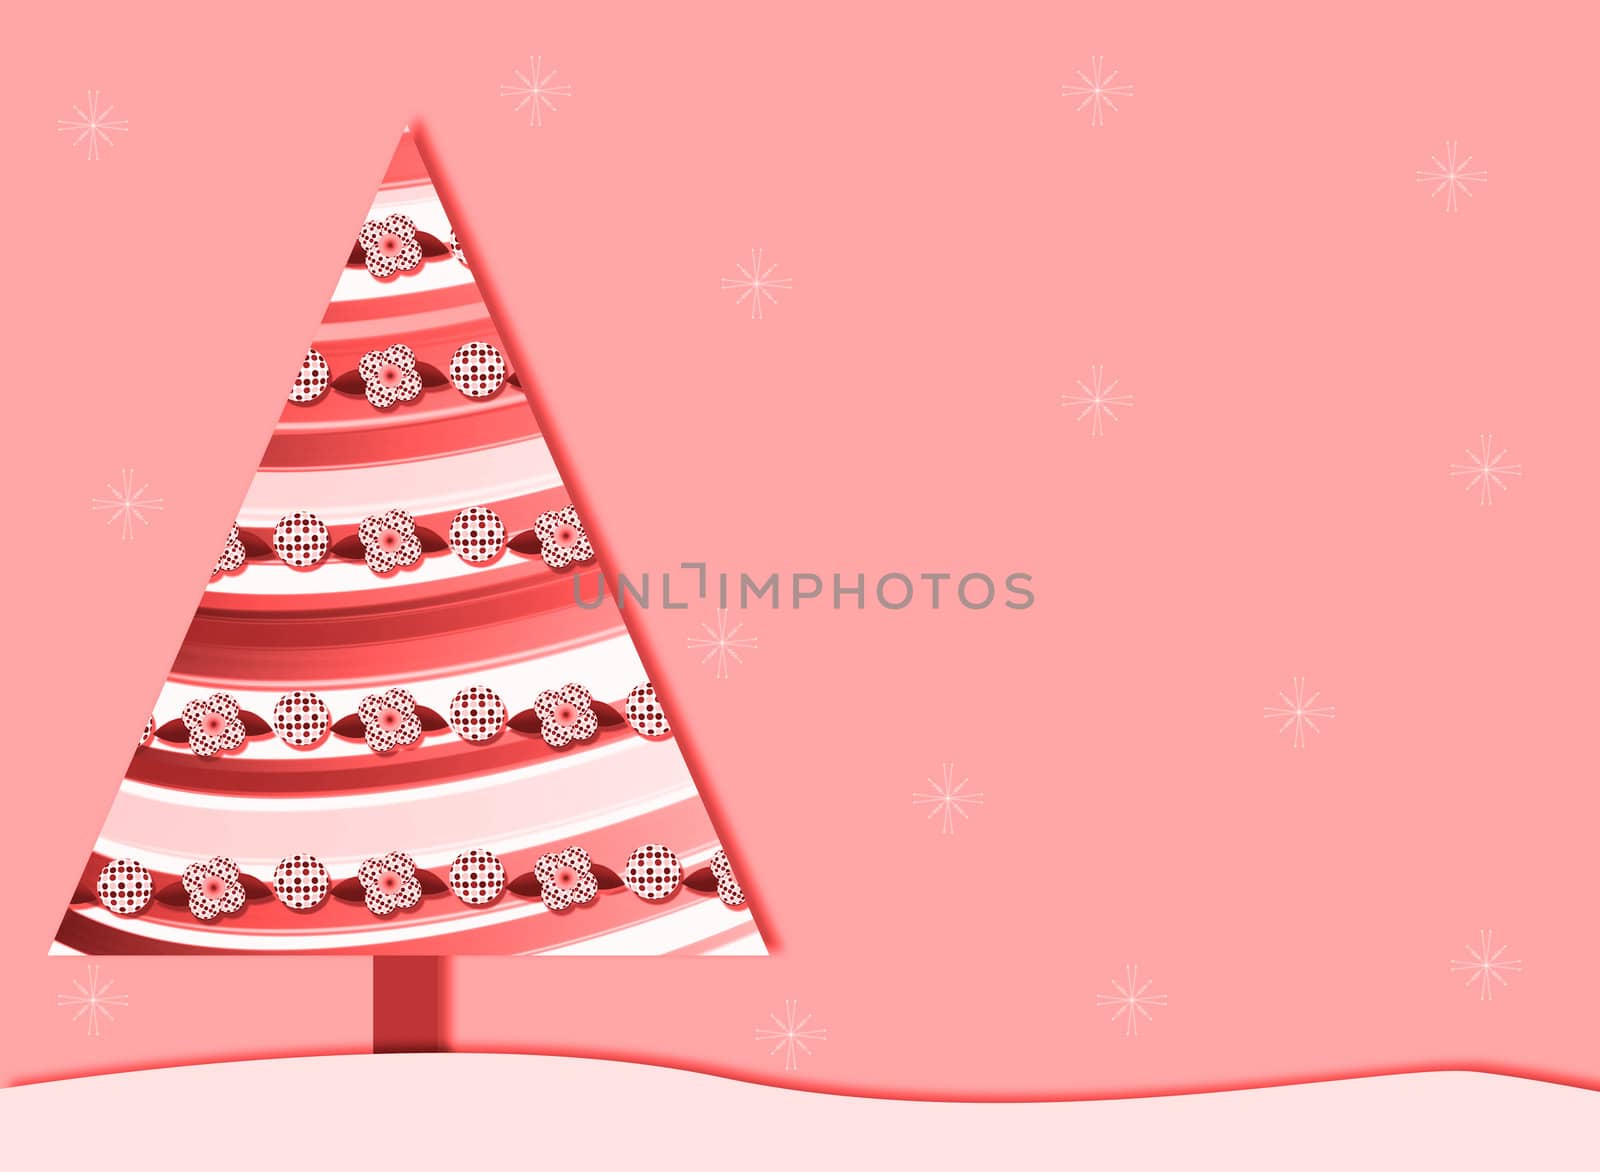 Pink Retro Christmas tree background by ftlaudgirl